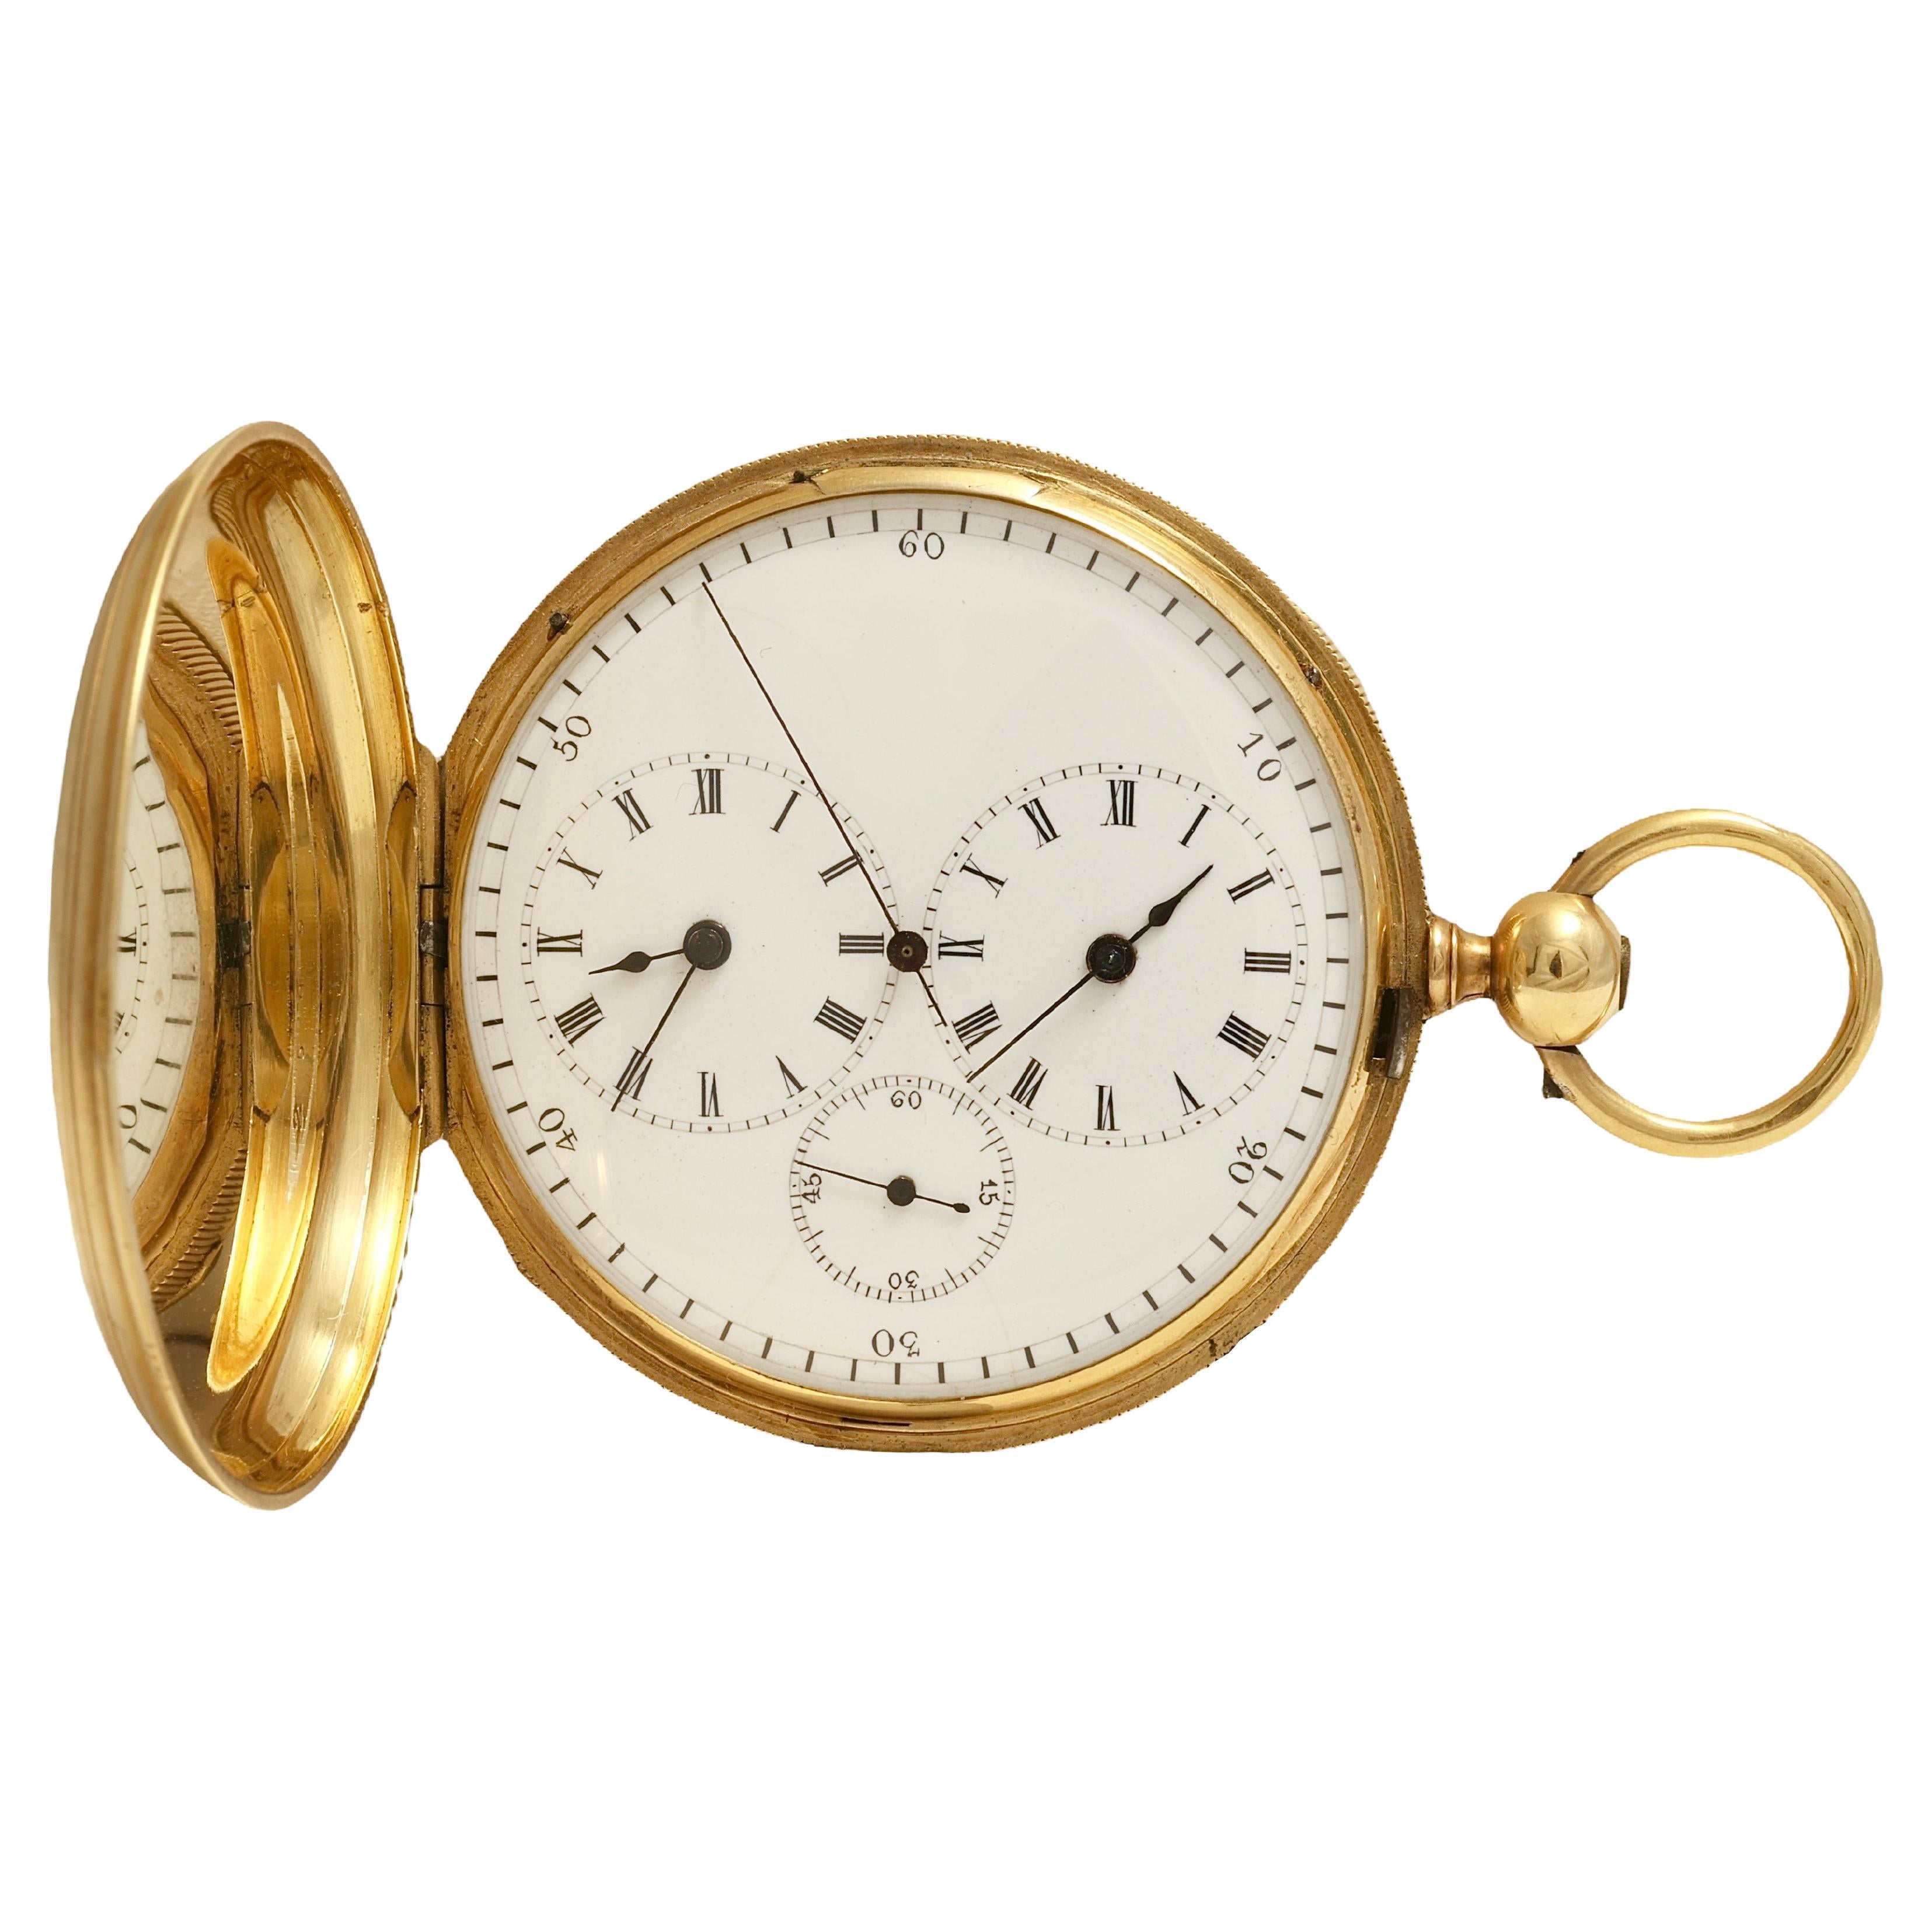 18 kt. Gold Dual Time, Dead Beat Second, Double Barrel A.Perret Pocket Watch For Sale